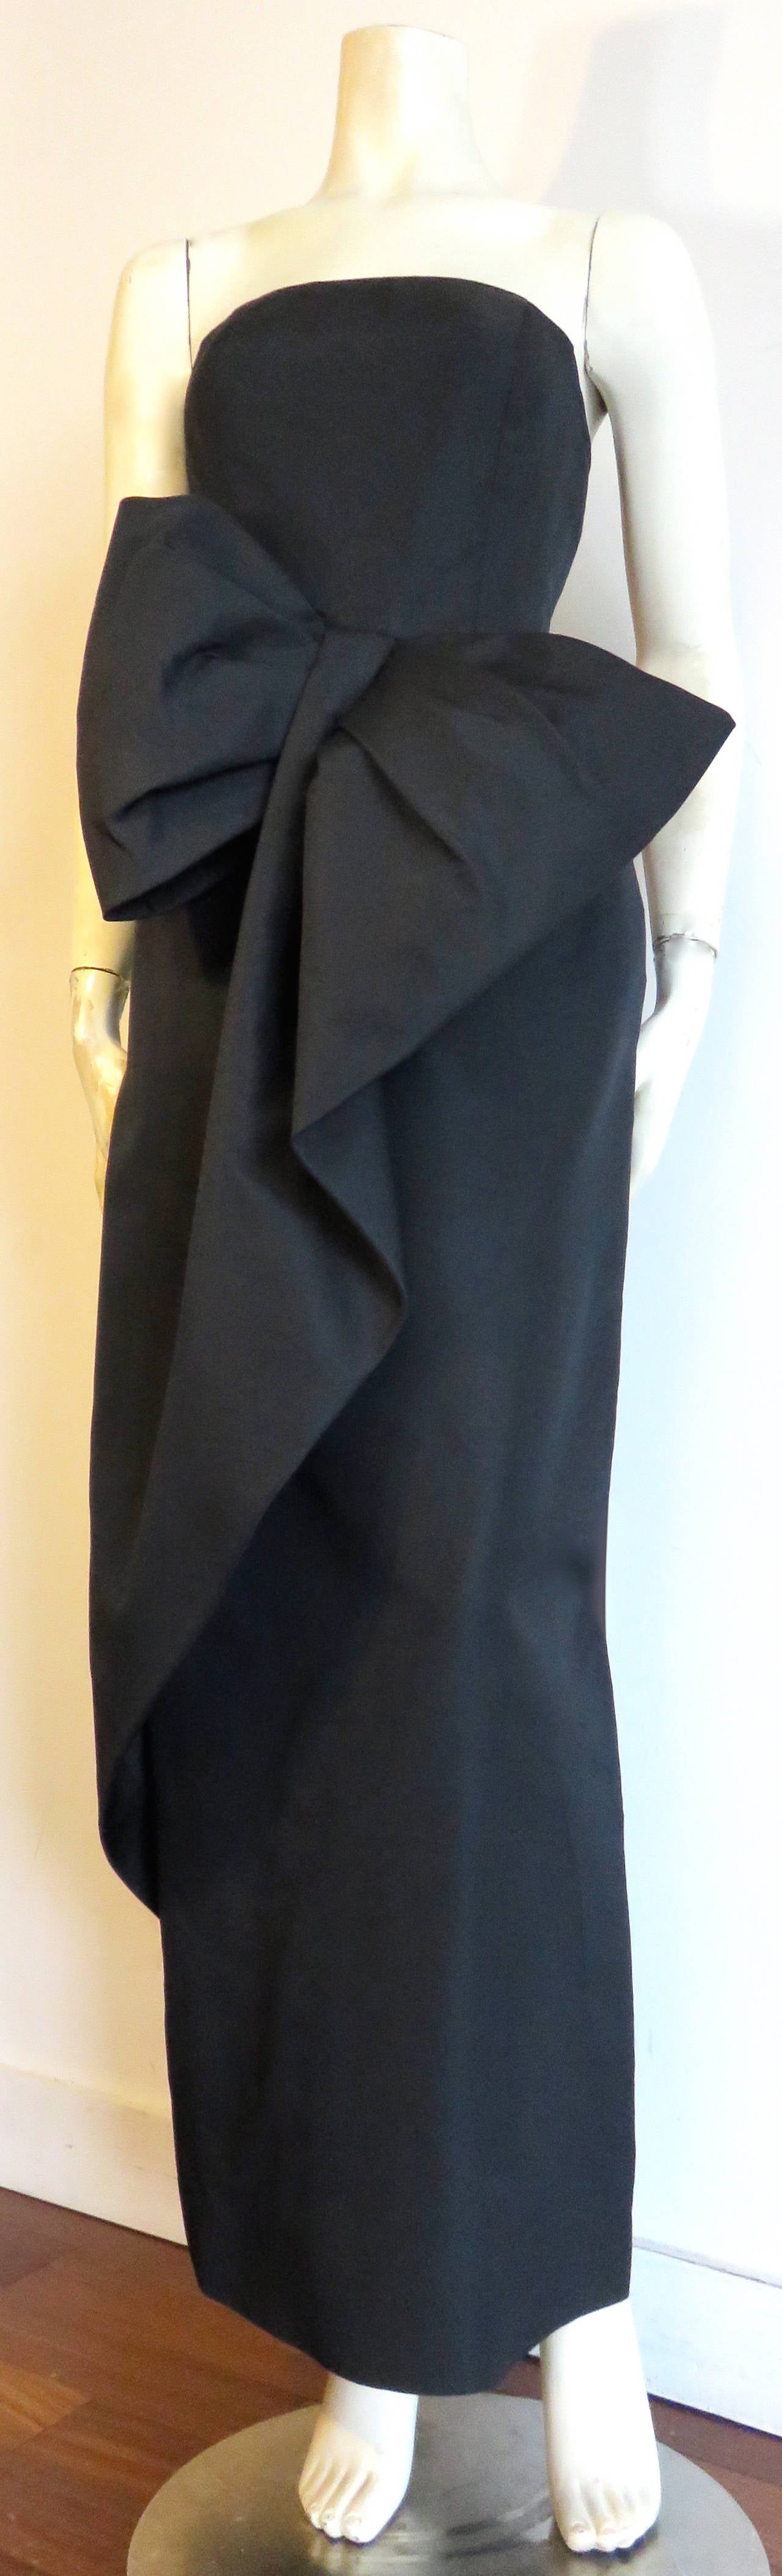 Worn once, early 1970's, MIGNON, 'Gilda' inspired evening dress.

This gorgeous dress is made of black taffeta, and features an incredible, cascading, draped bow detail at the front waist.

Boned, princess seam bodice with center-back zipper